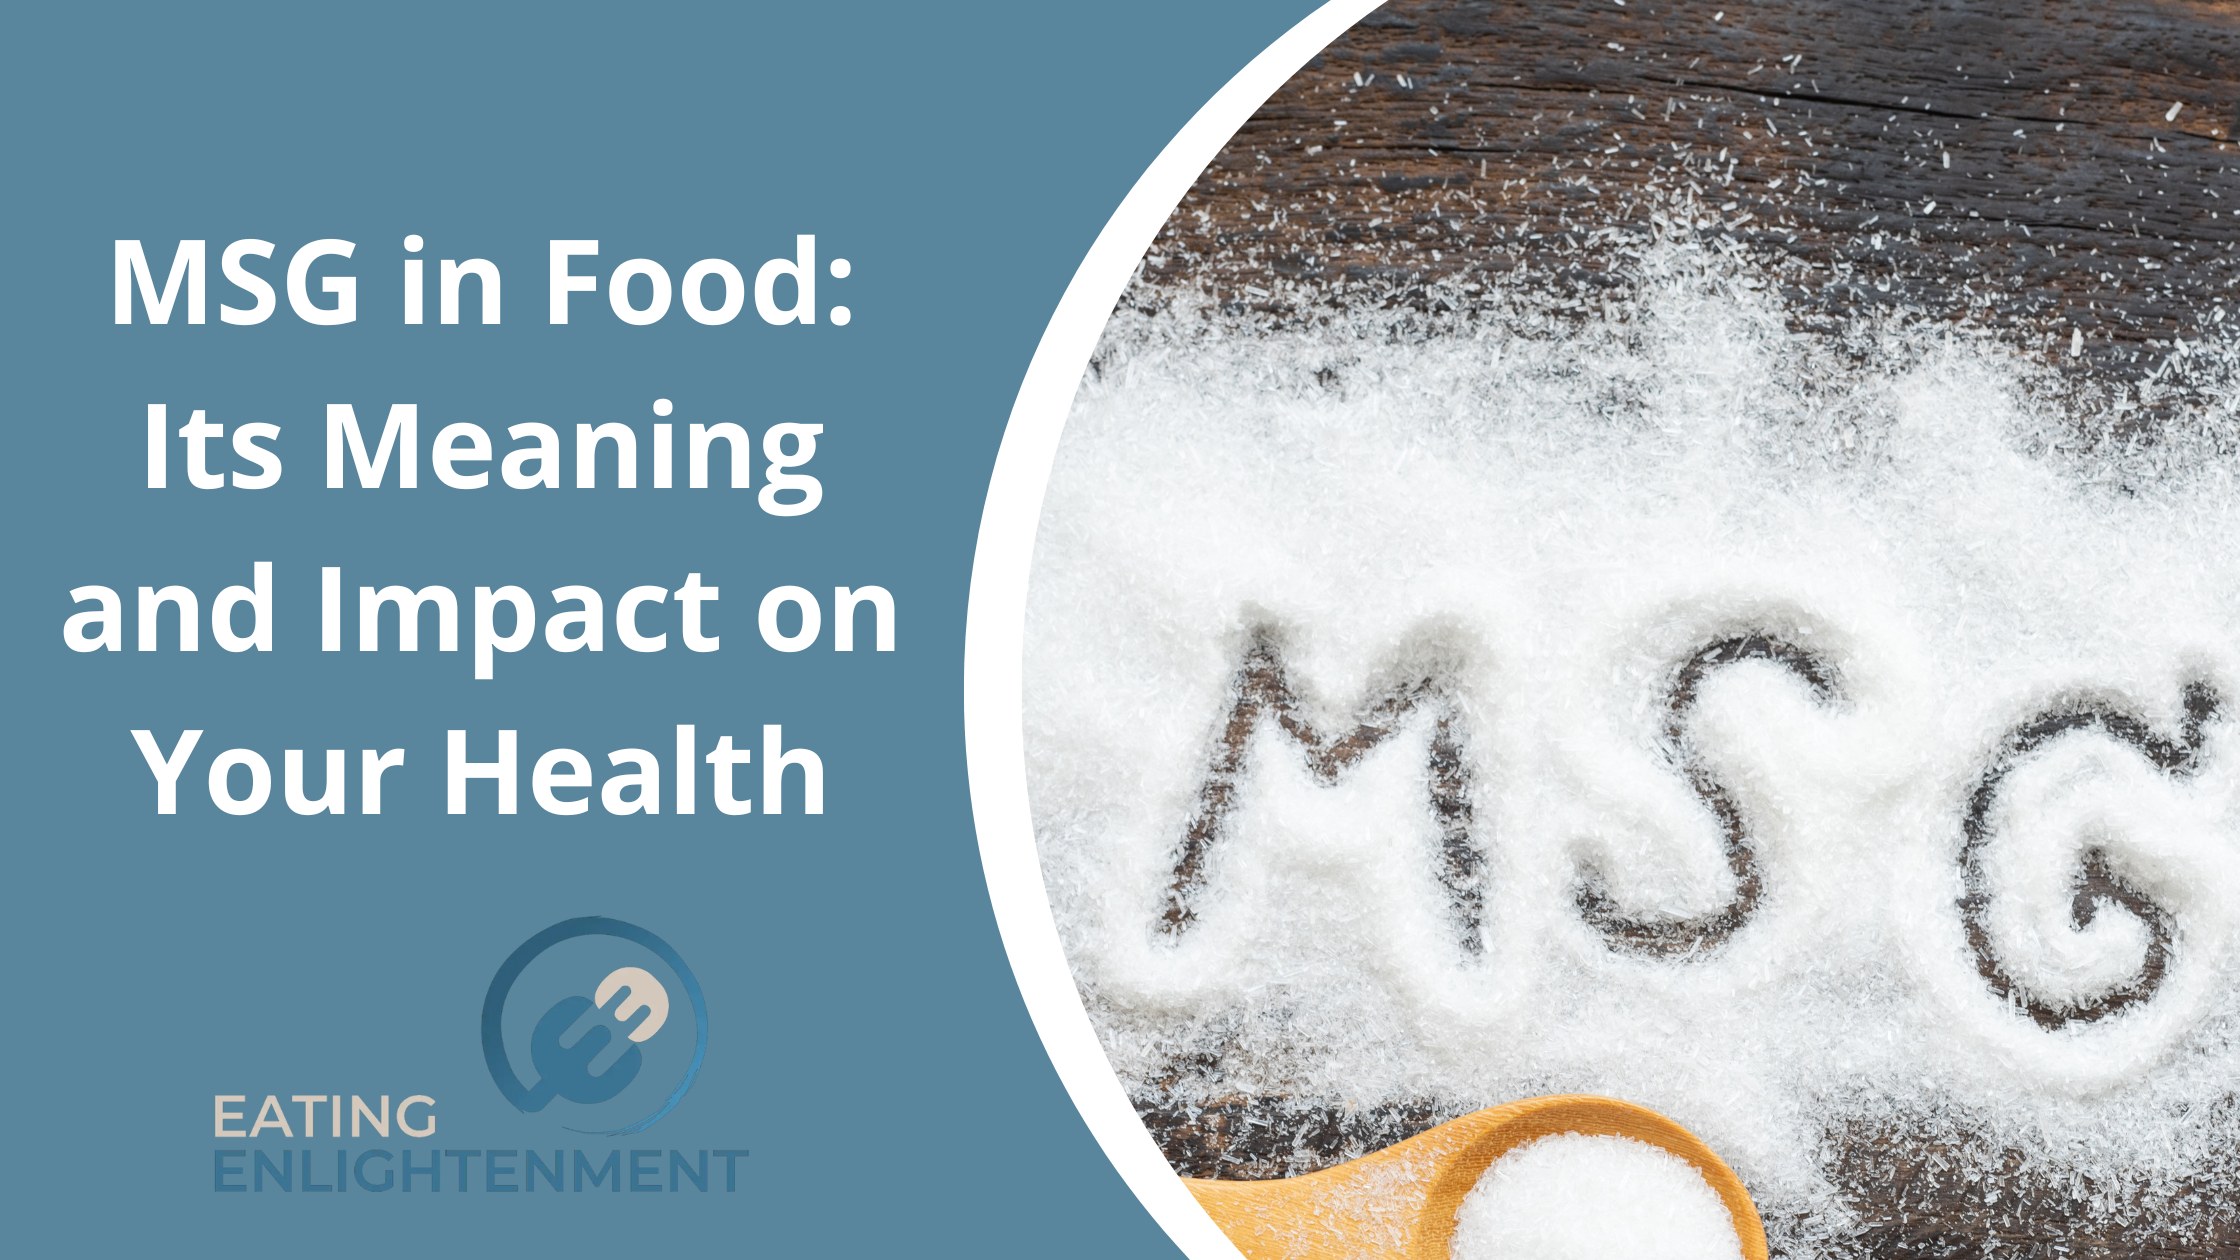 MSG in Food: Its Meaning and Impact on Your Health